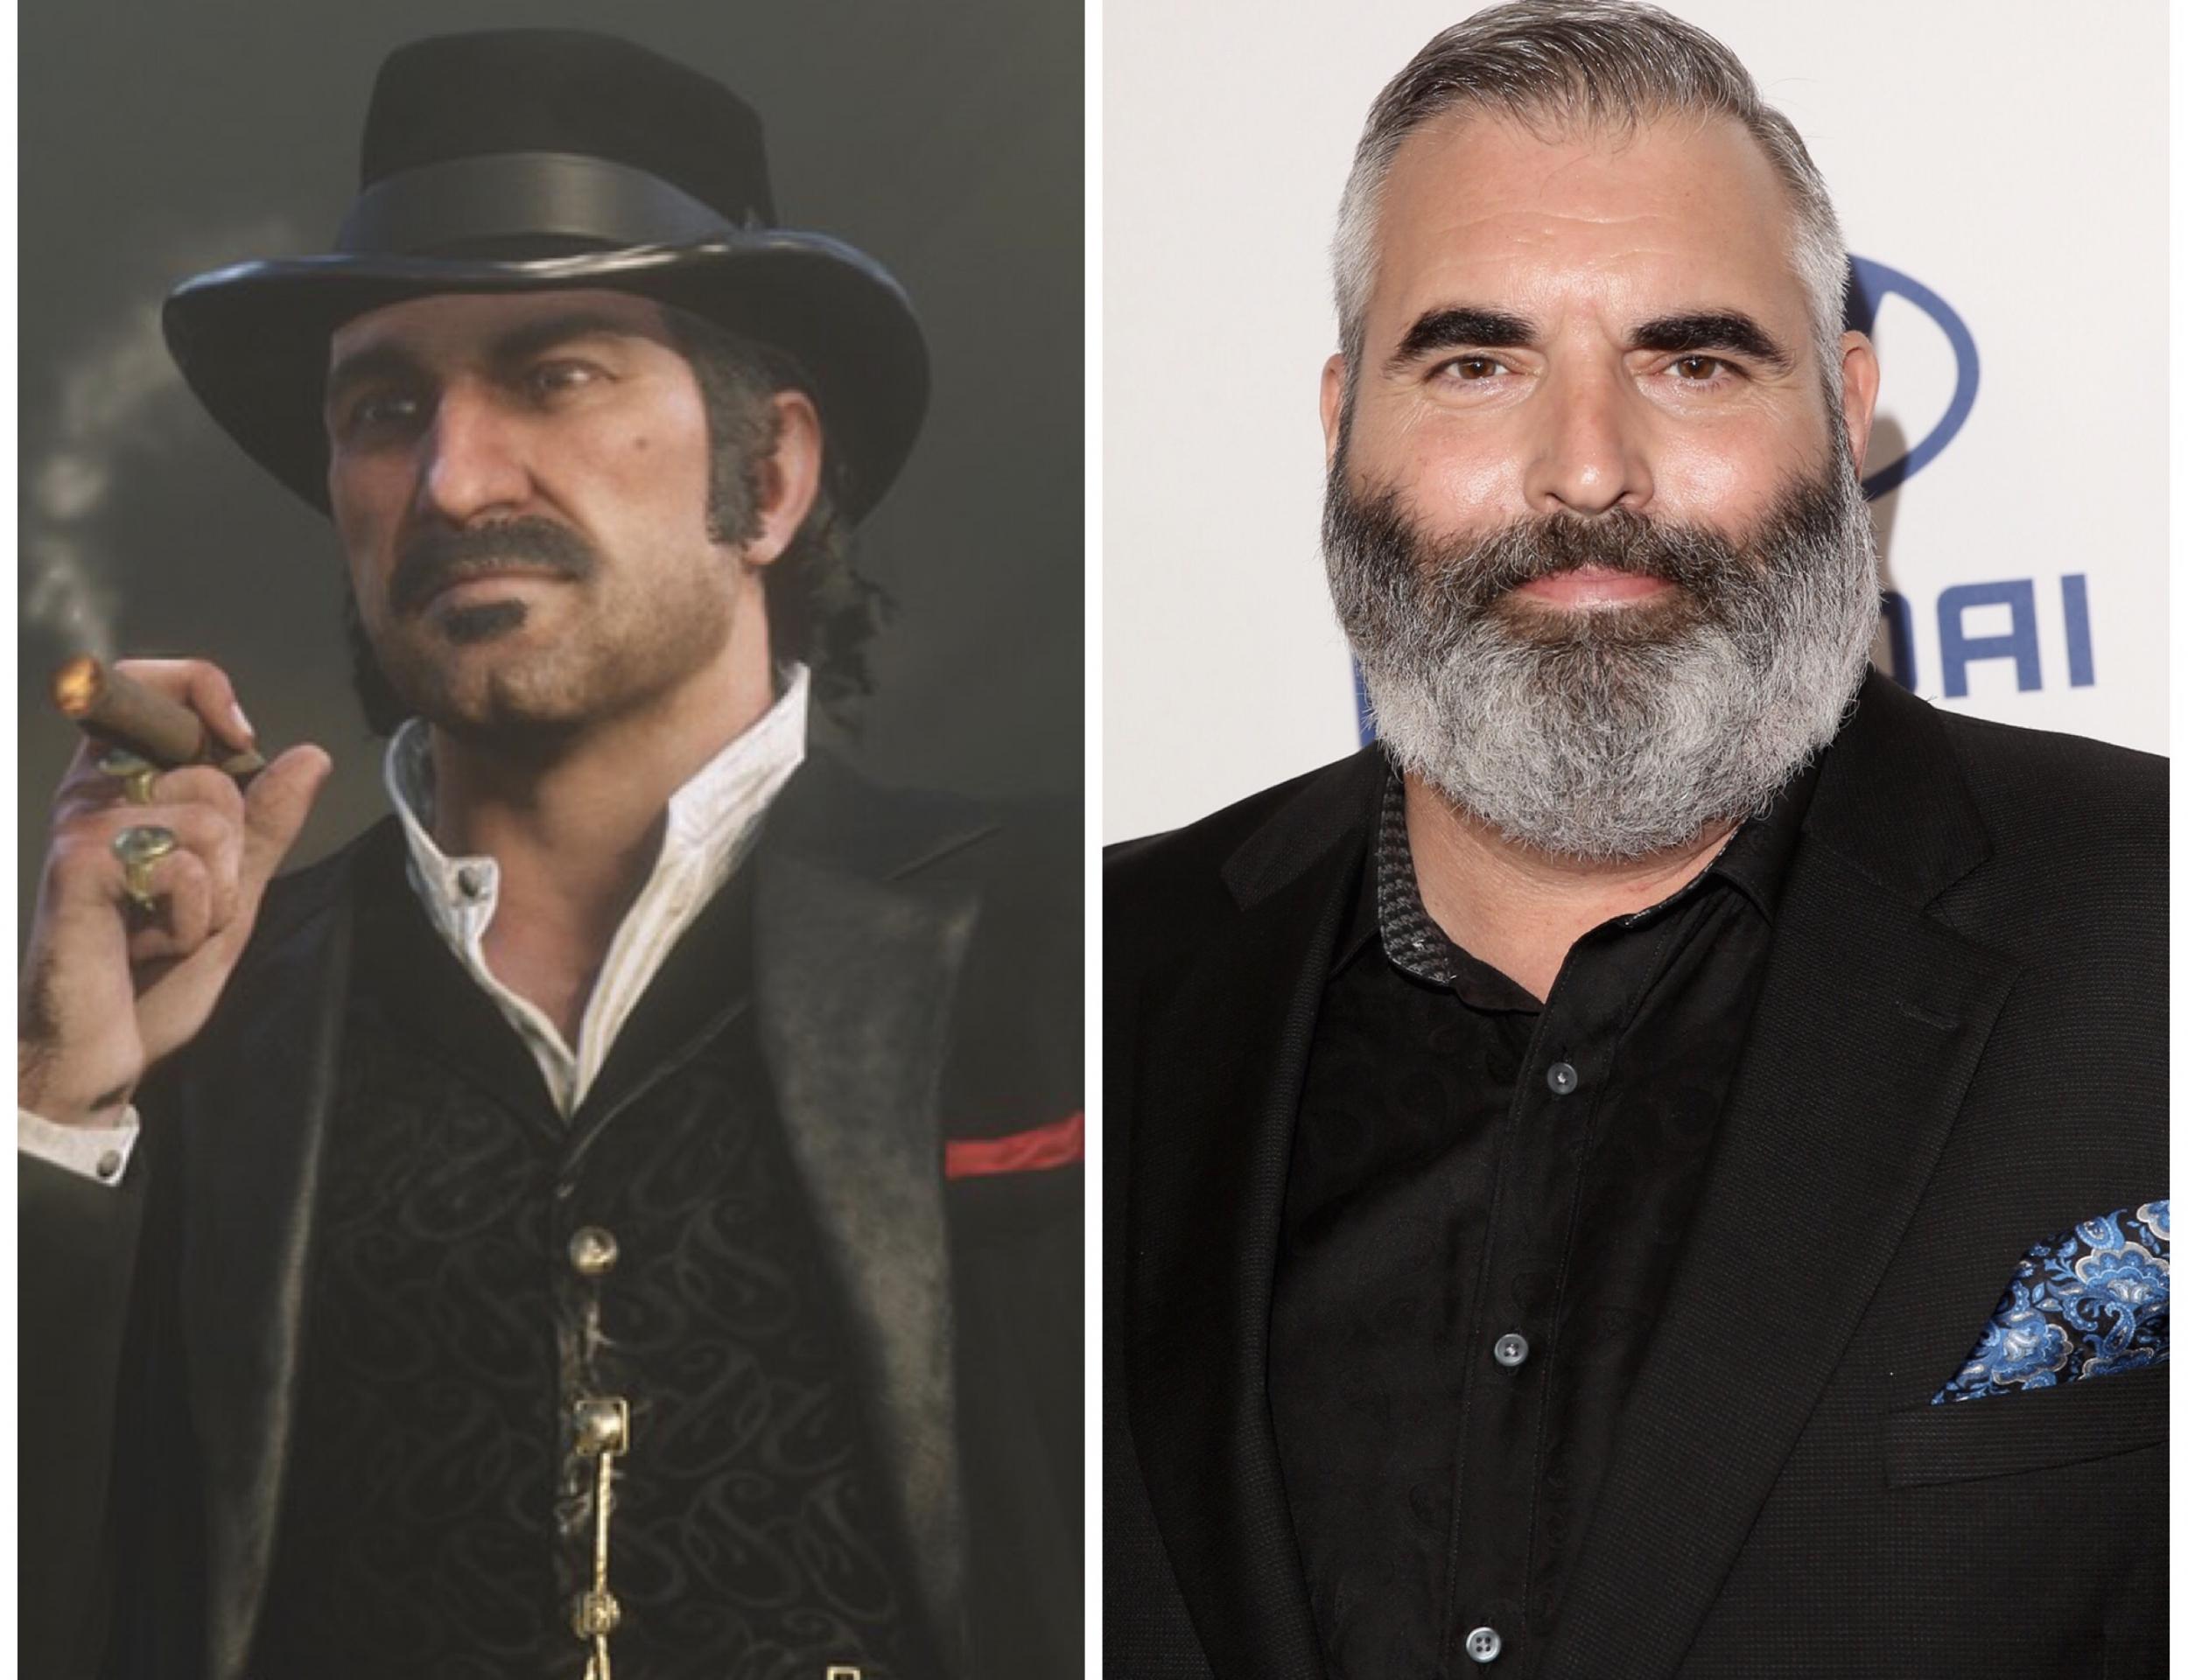 Why are the voice actors in Red Dead Redemption so bad? - Quora